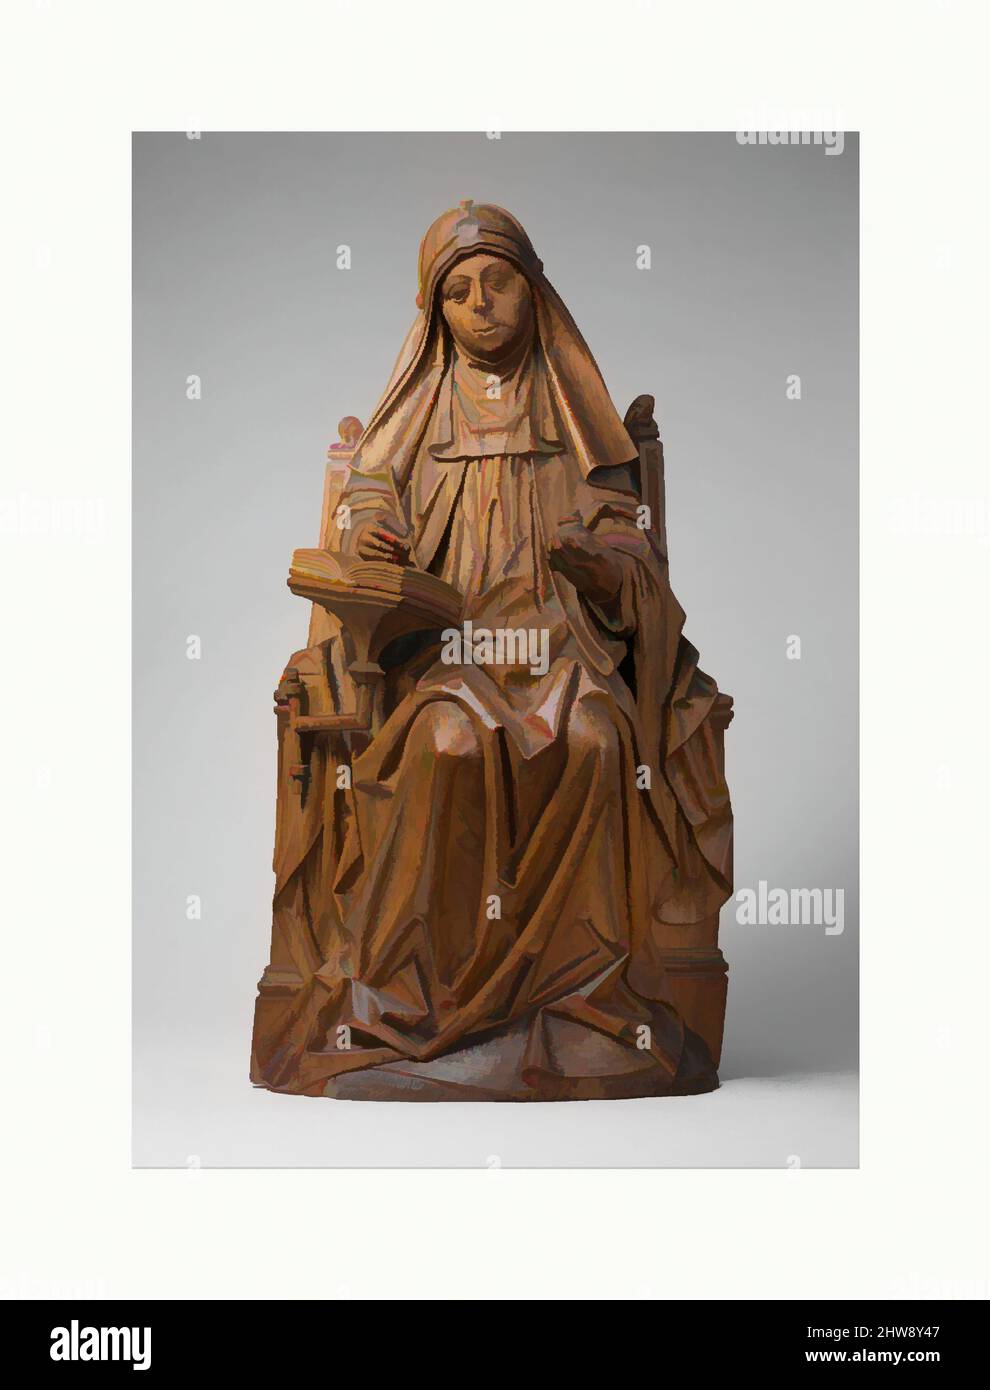 Art inspired by Saint Bridget of Sweden, ca. 1470, Made in Brabant, Netherlands, South Netherlandish, Walnut, rock crystal cabochon. Originally painted., Overall: 33 7/8 x 17 5/8 x 11 3/8 in. (86 x 44.8 x 28.9 cm), Sculpture-Wood, Master of Soeterbeeck (active ca. 1470–80), Saint, Classic works modernized by Artotop with a splash of modernity. Shapes, color and value, eye-catching visual impact on art. Emotions through freedom of artworks in a contemporary way. A timeless message pursuing a wildly creative new direction. Artists turning to the digital medium and creating the Artotop NFT Stock Photo